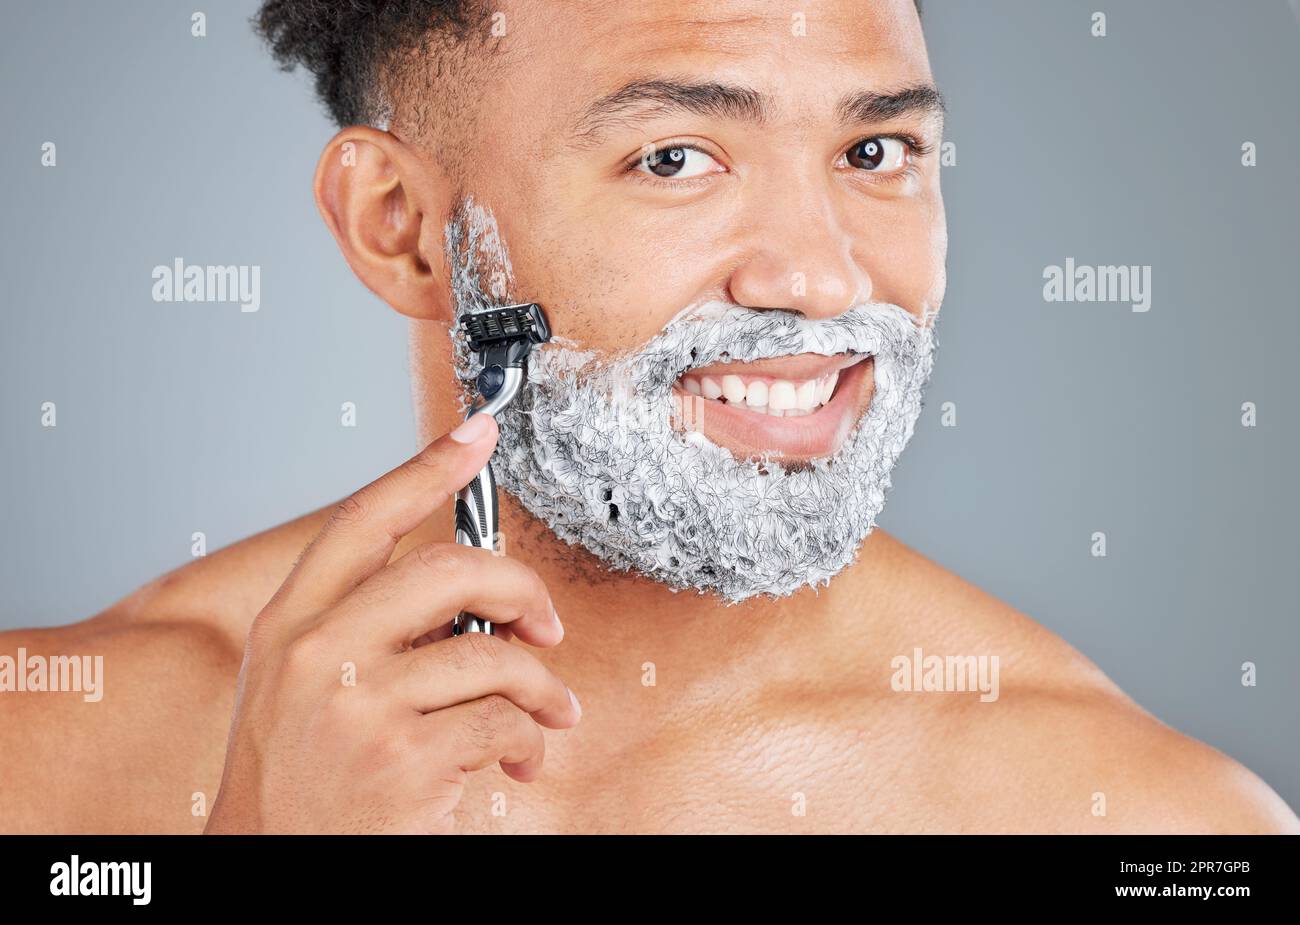 Lets get rid of this beard. Studio portrait of a handsome young man shaving against a grey background. Stock Photo